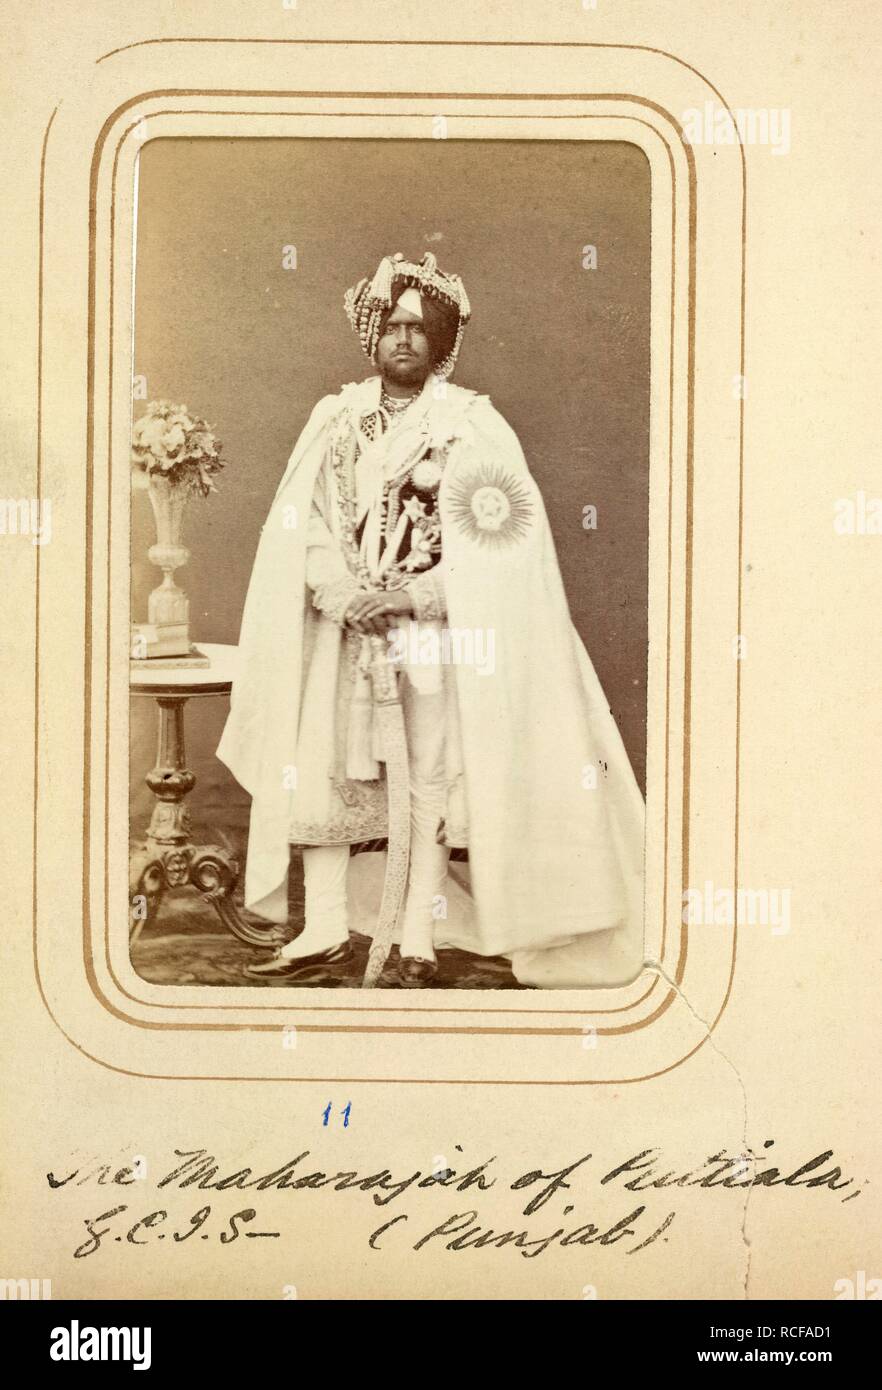 Patiala: Mahendra Singh. c.1870. Patiala: Mahendra Singh, Maharaja of Patiala (1852-1876). Portrait. Full-length standing carte-de-visite portrait, wearing robes and order of the Star of India.  Originally published/produced in c.1870. . Source: OIOC Photo 1271(11),. Author: Bourne & Shepherd. Stock Photo